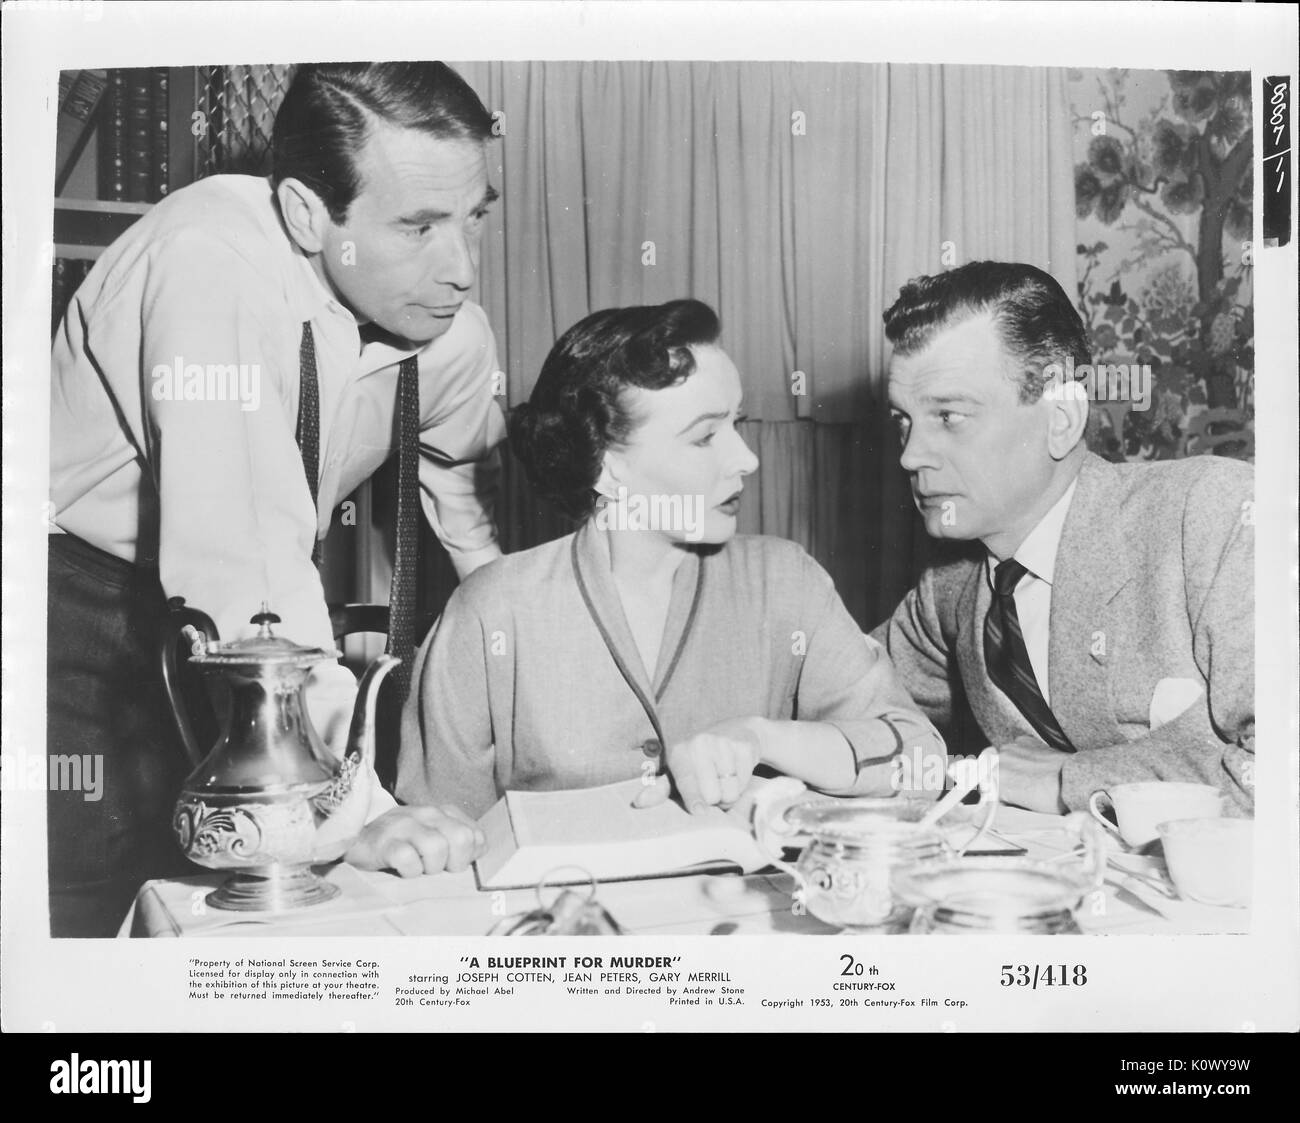 A movie still scene from 'A Blueprint For Murder' (1953 20th Century Fox thriller film), showing a seated woman pointing out something in a book to the man on her left while the other man on her right listens, 1953. Stock Photo